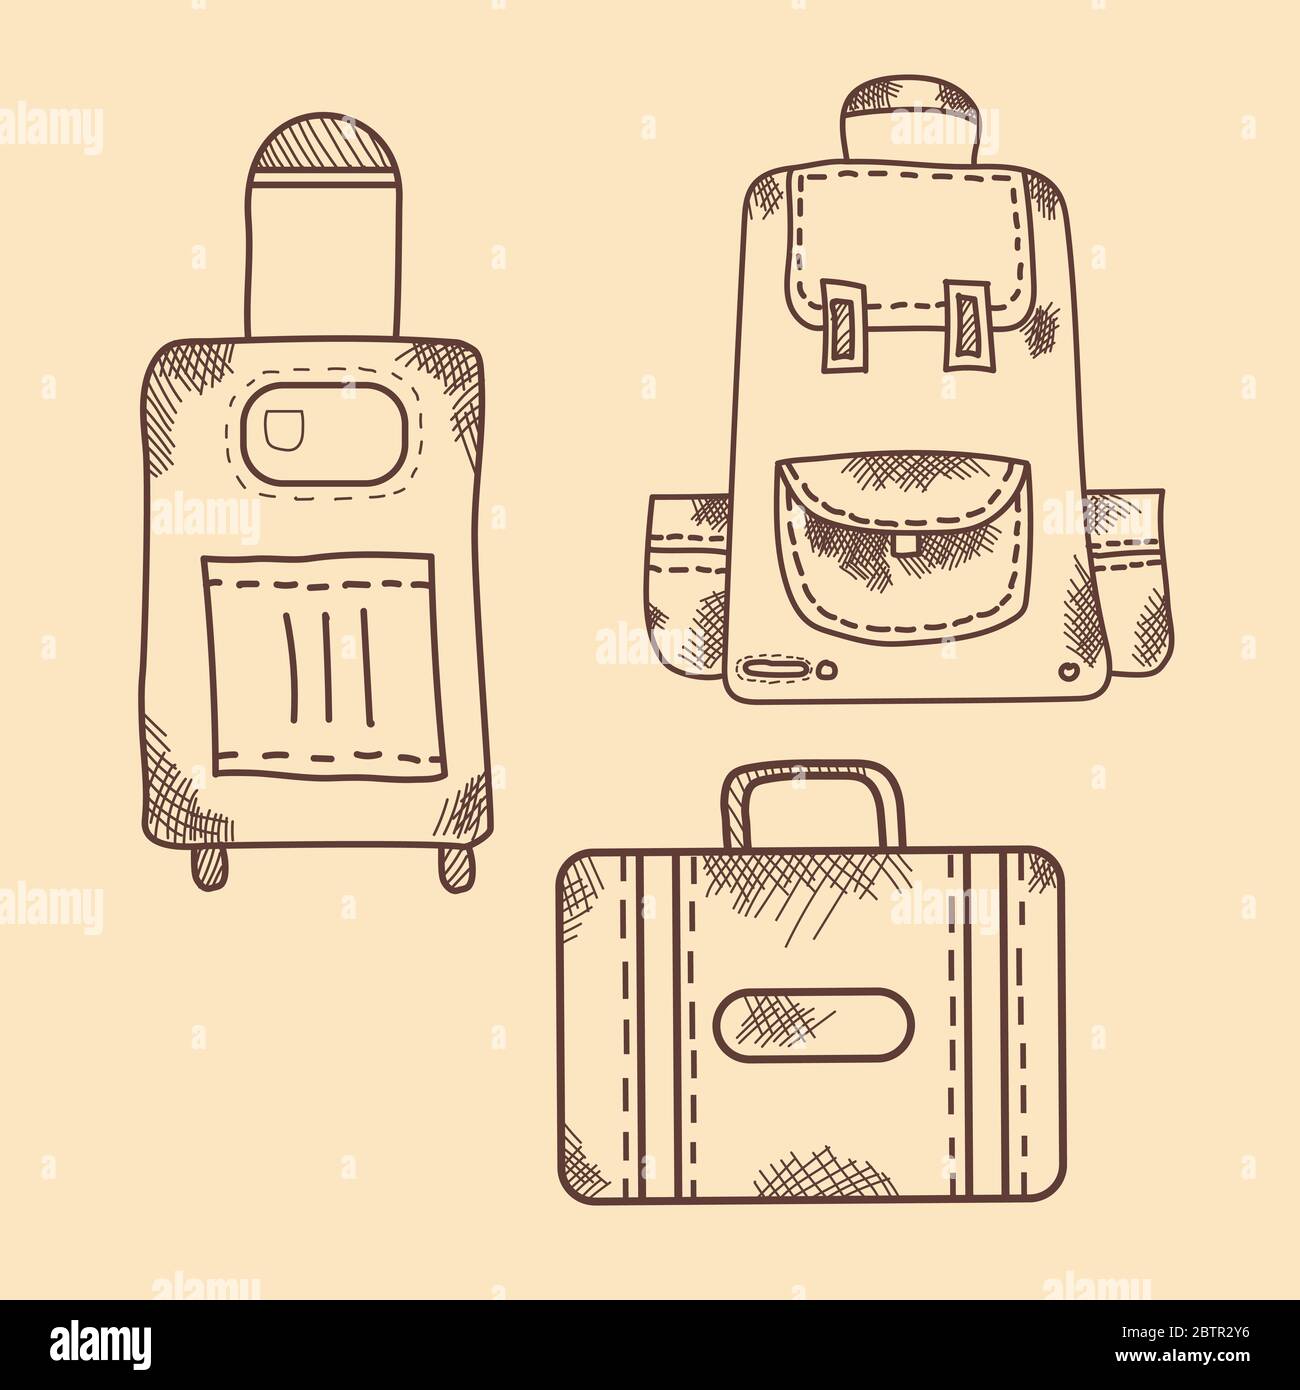 Vector hand drawing. Vintage. Pictogram, icon, luggage, backpack with pockets, suitcase, on wheels Stock Vector